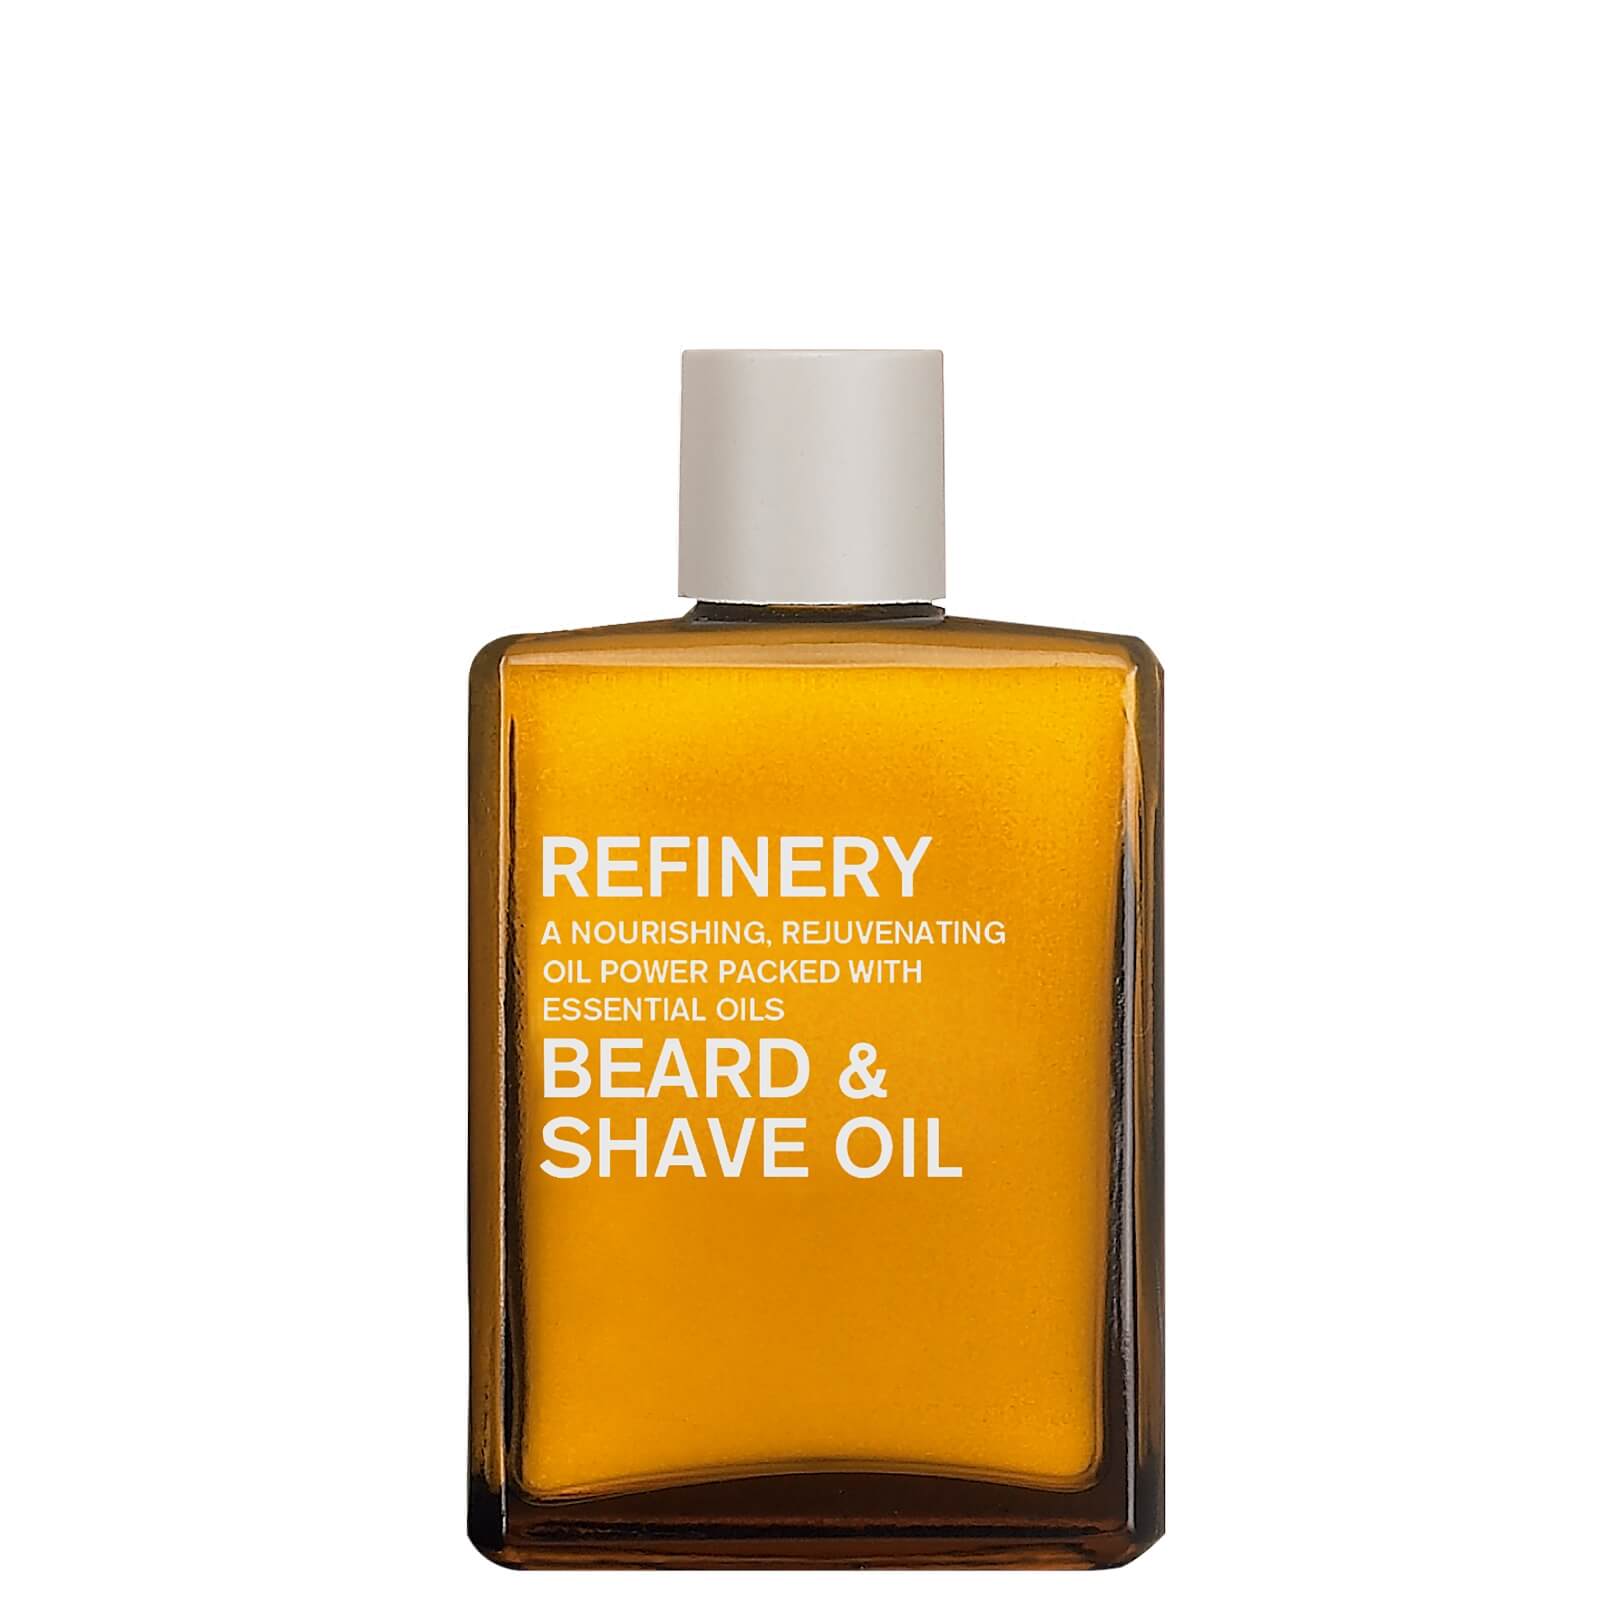 Aromatherapy Associates The Refinery Shave Oil 30ml